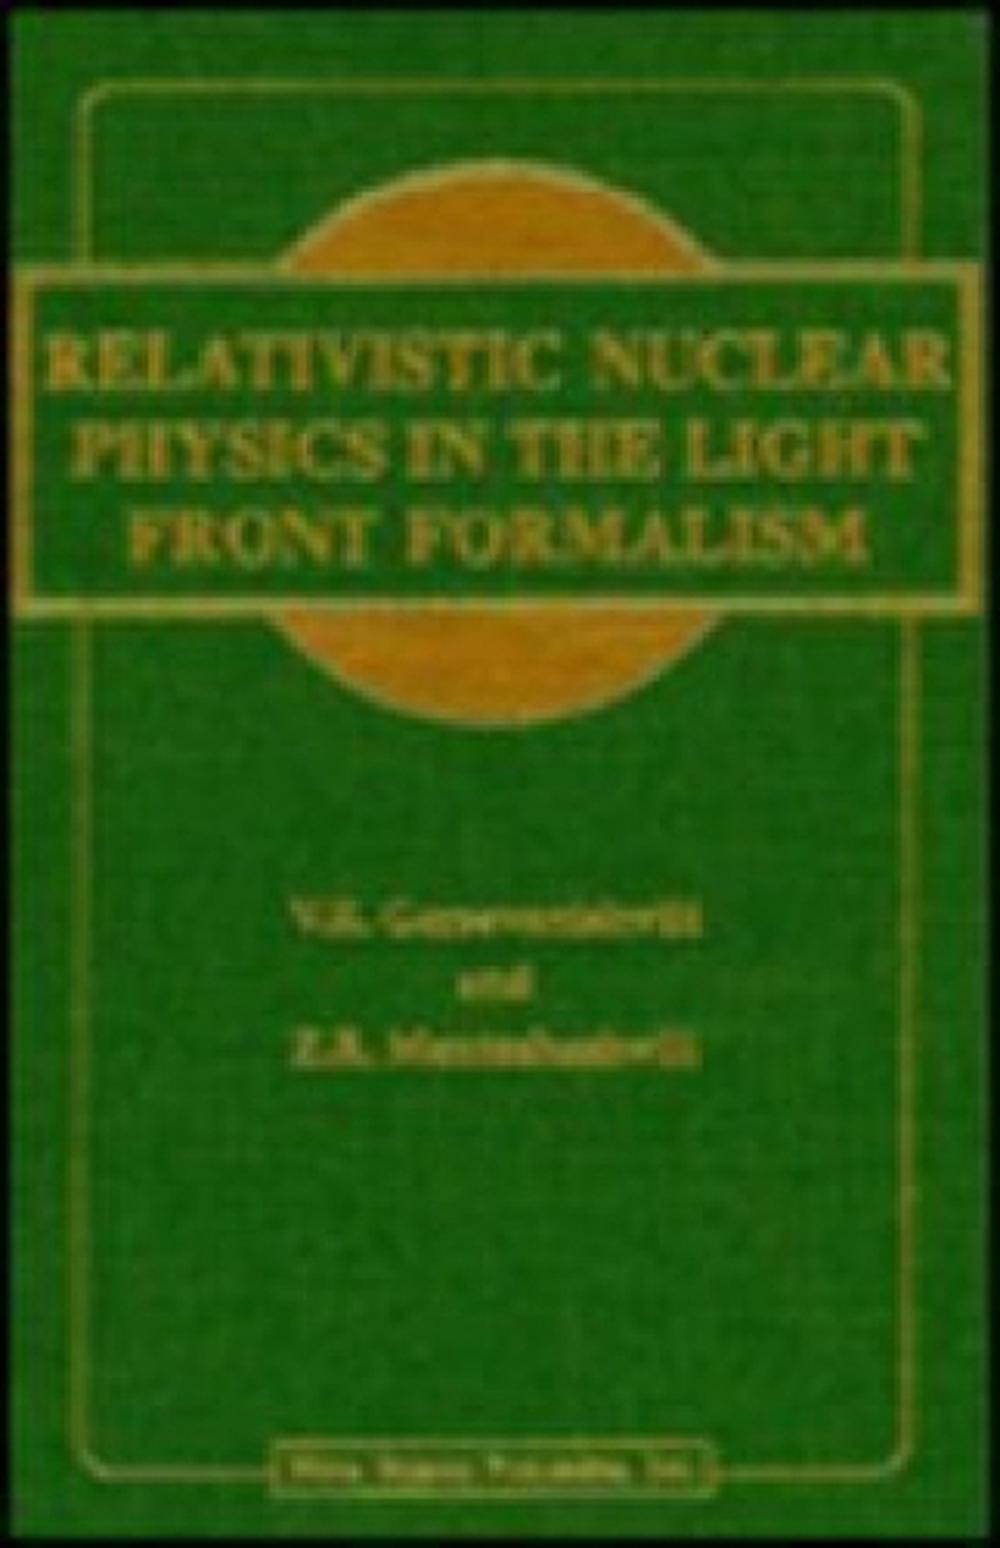 Relativistic Nuclear Physics in the Light Front Formalism by Z.R. Menteshashvili - Afbeelding 1 van 1